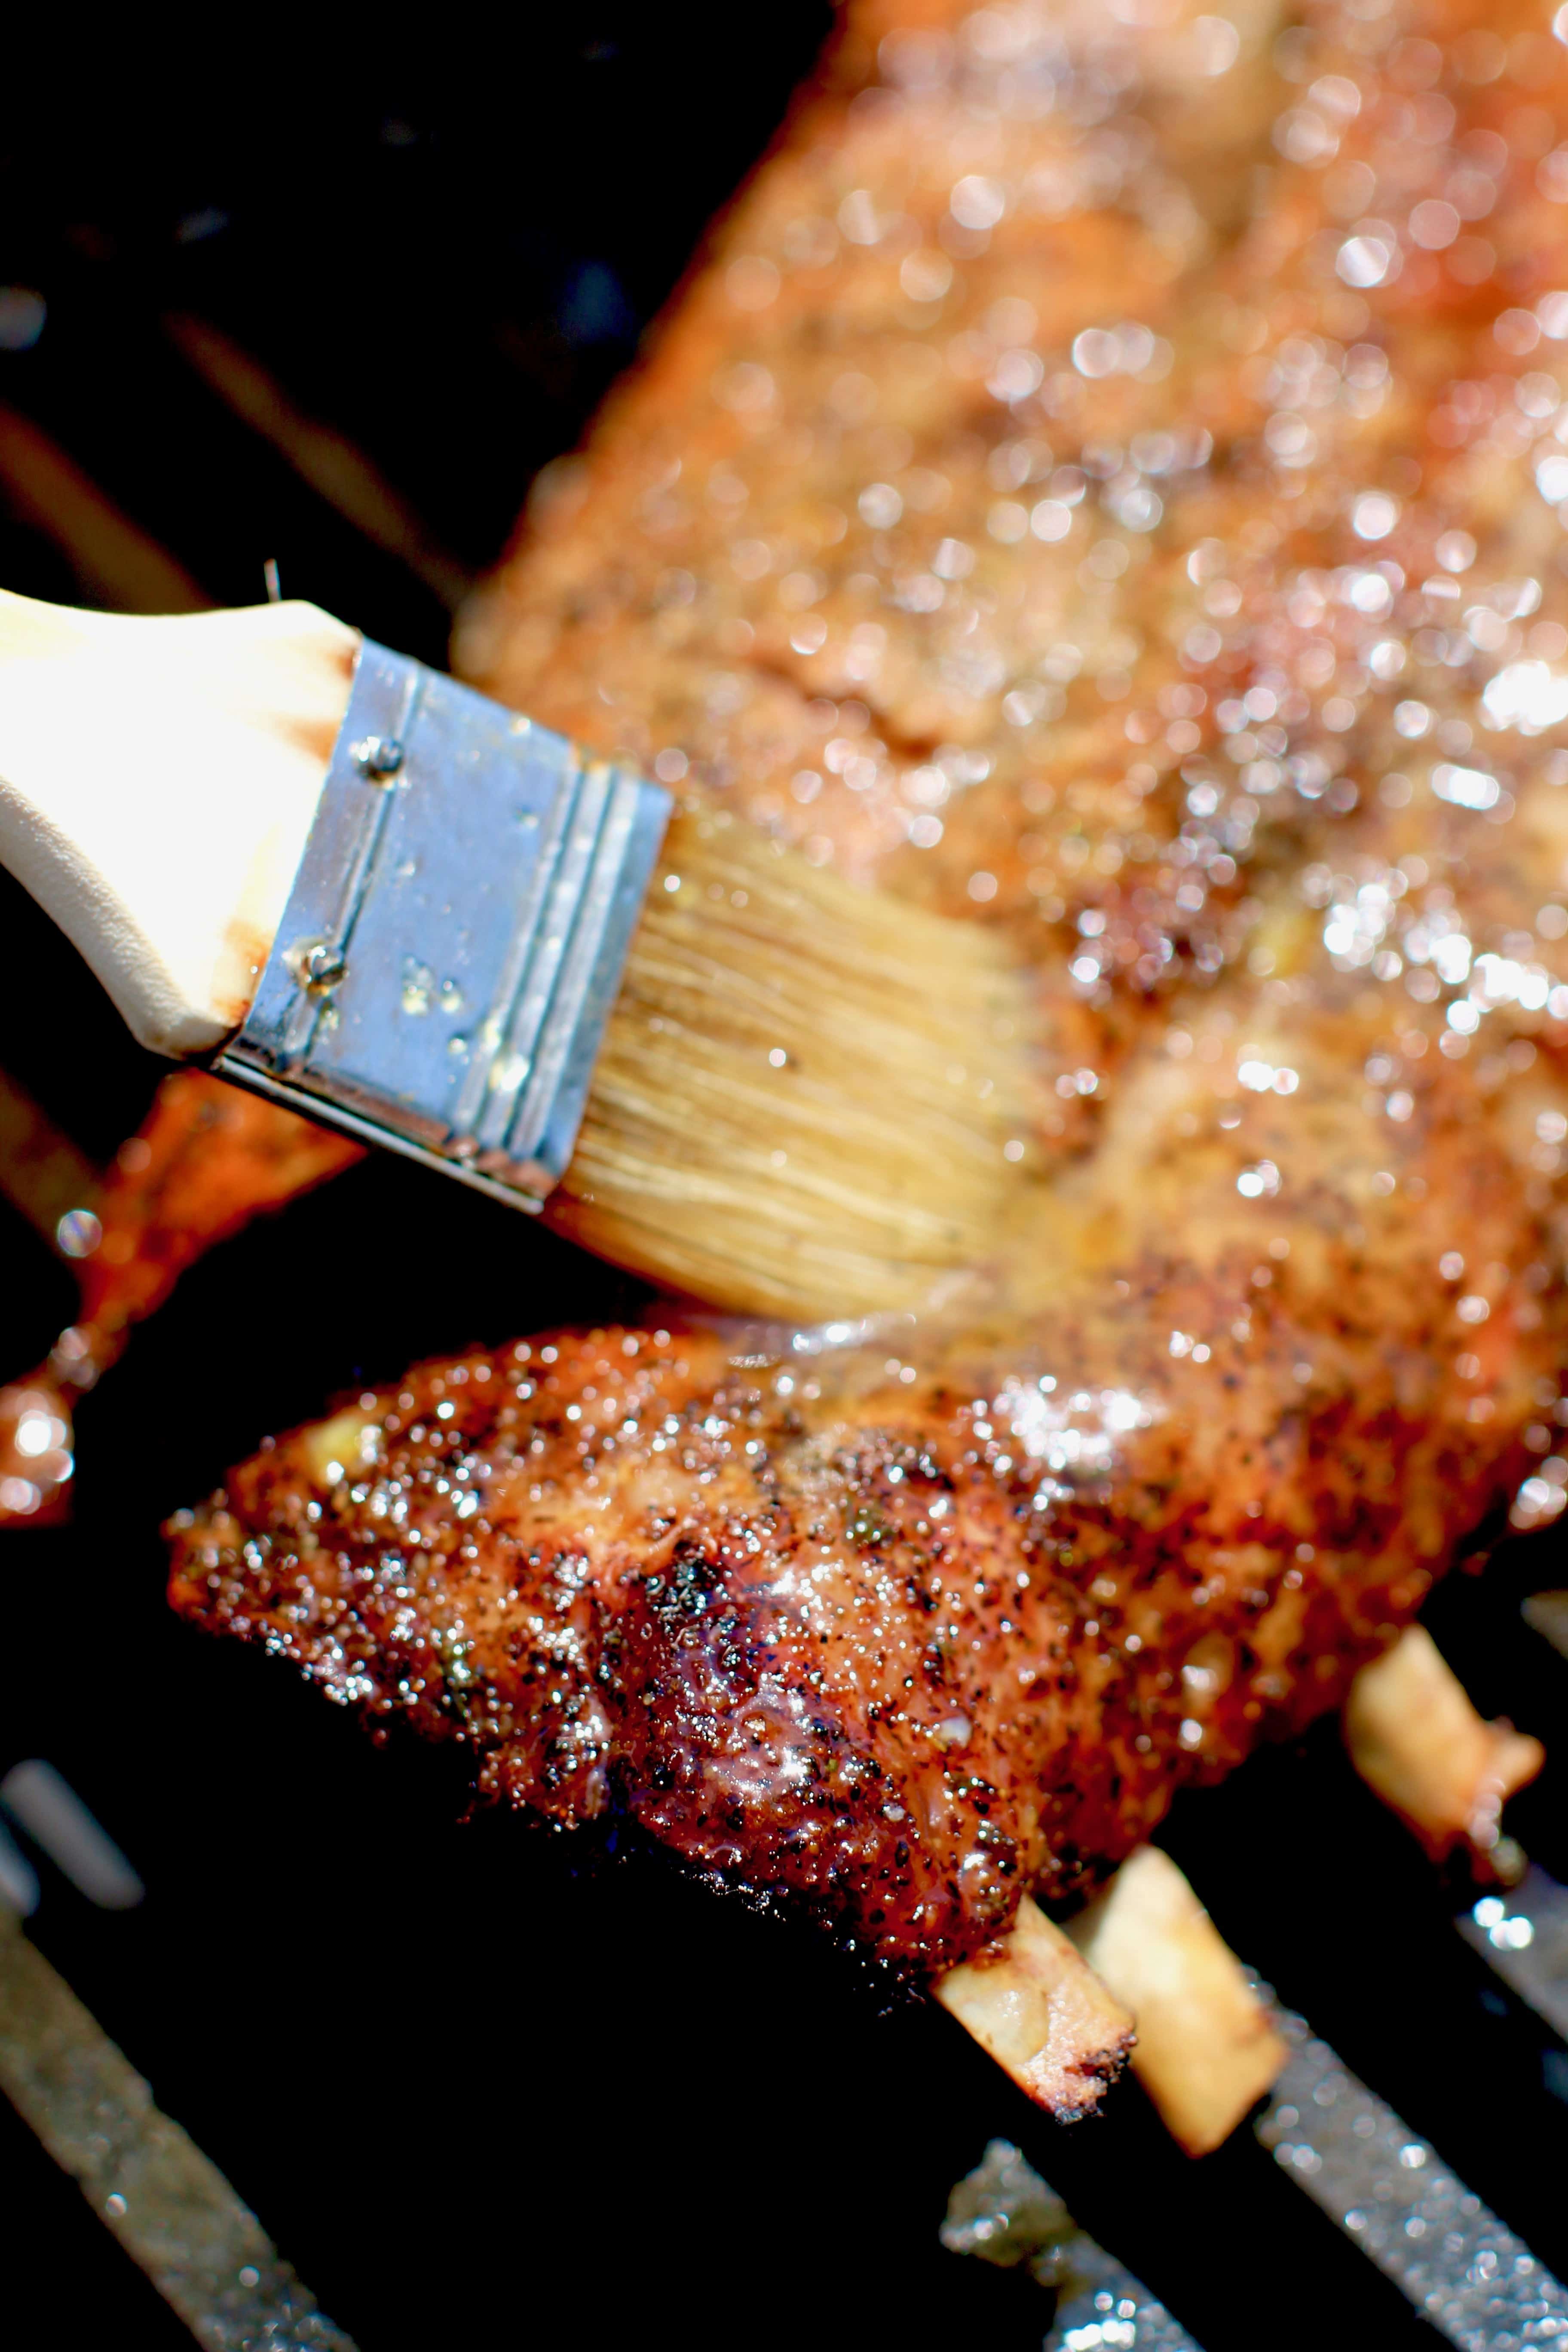 Pork ribs being slathered with glaze on gas grill.